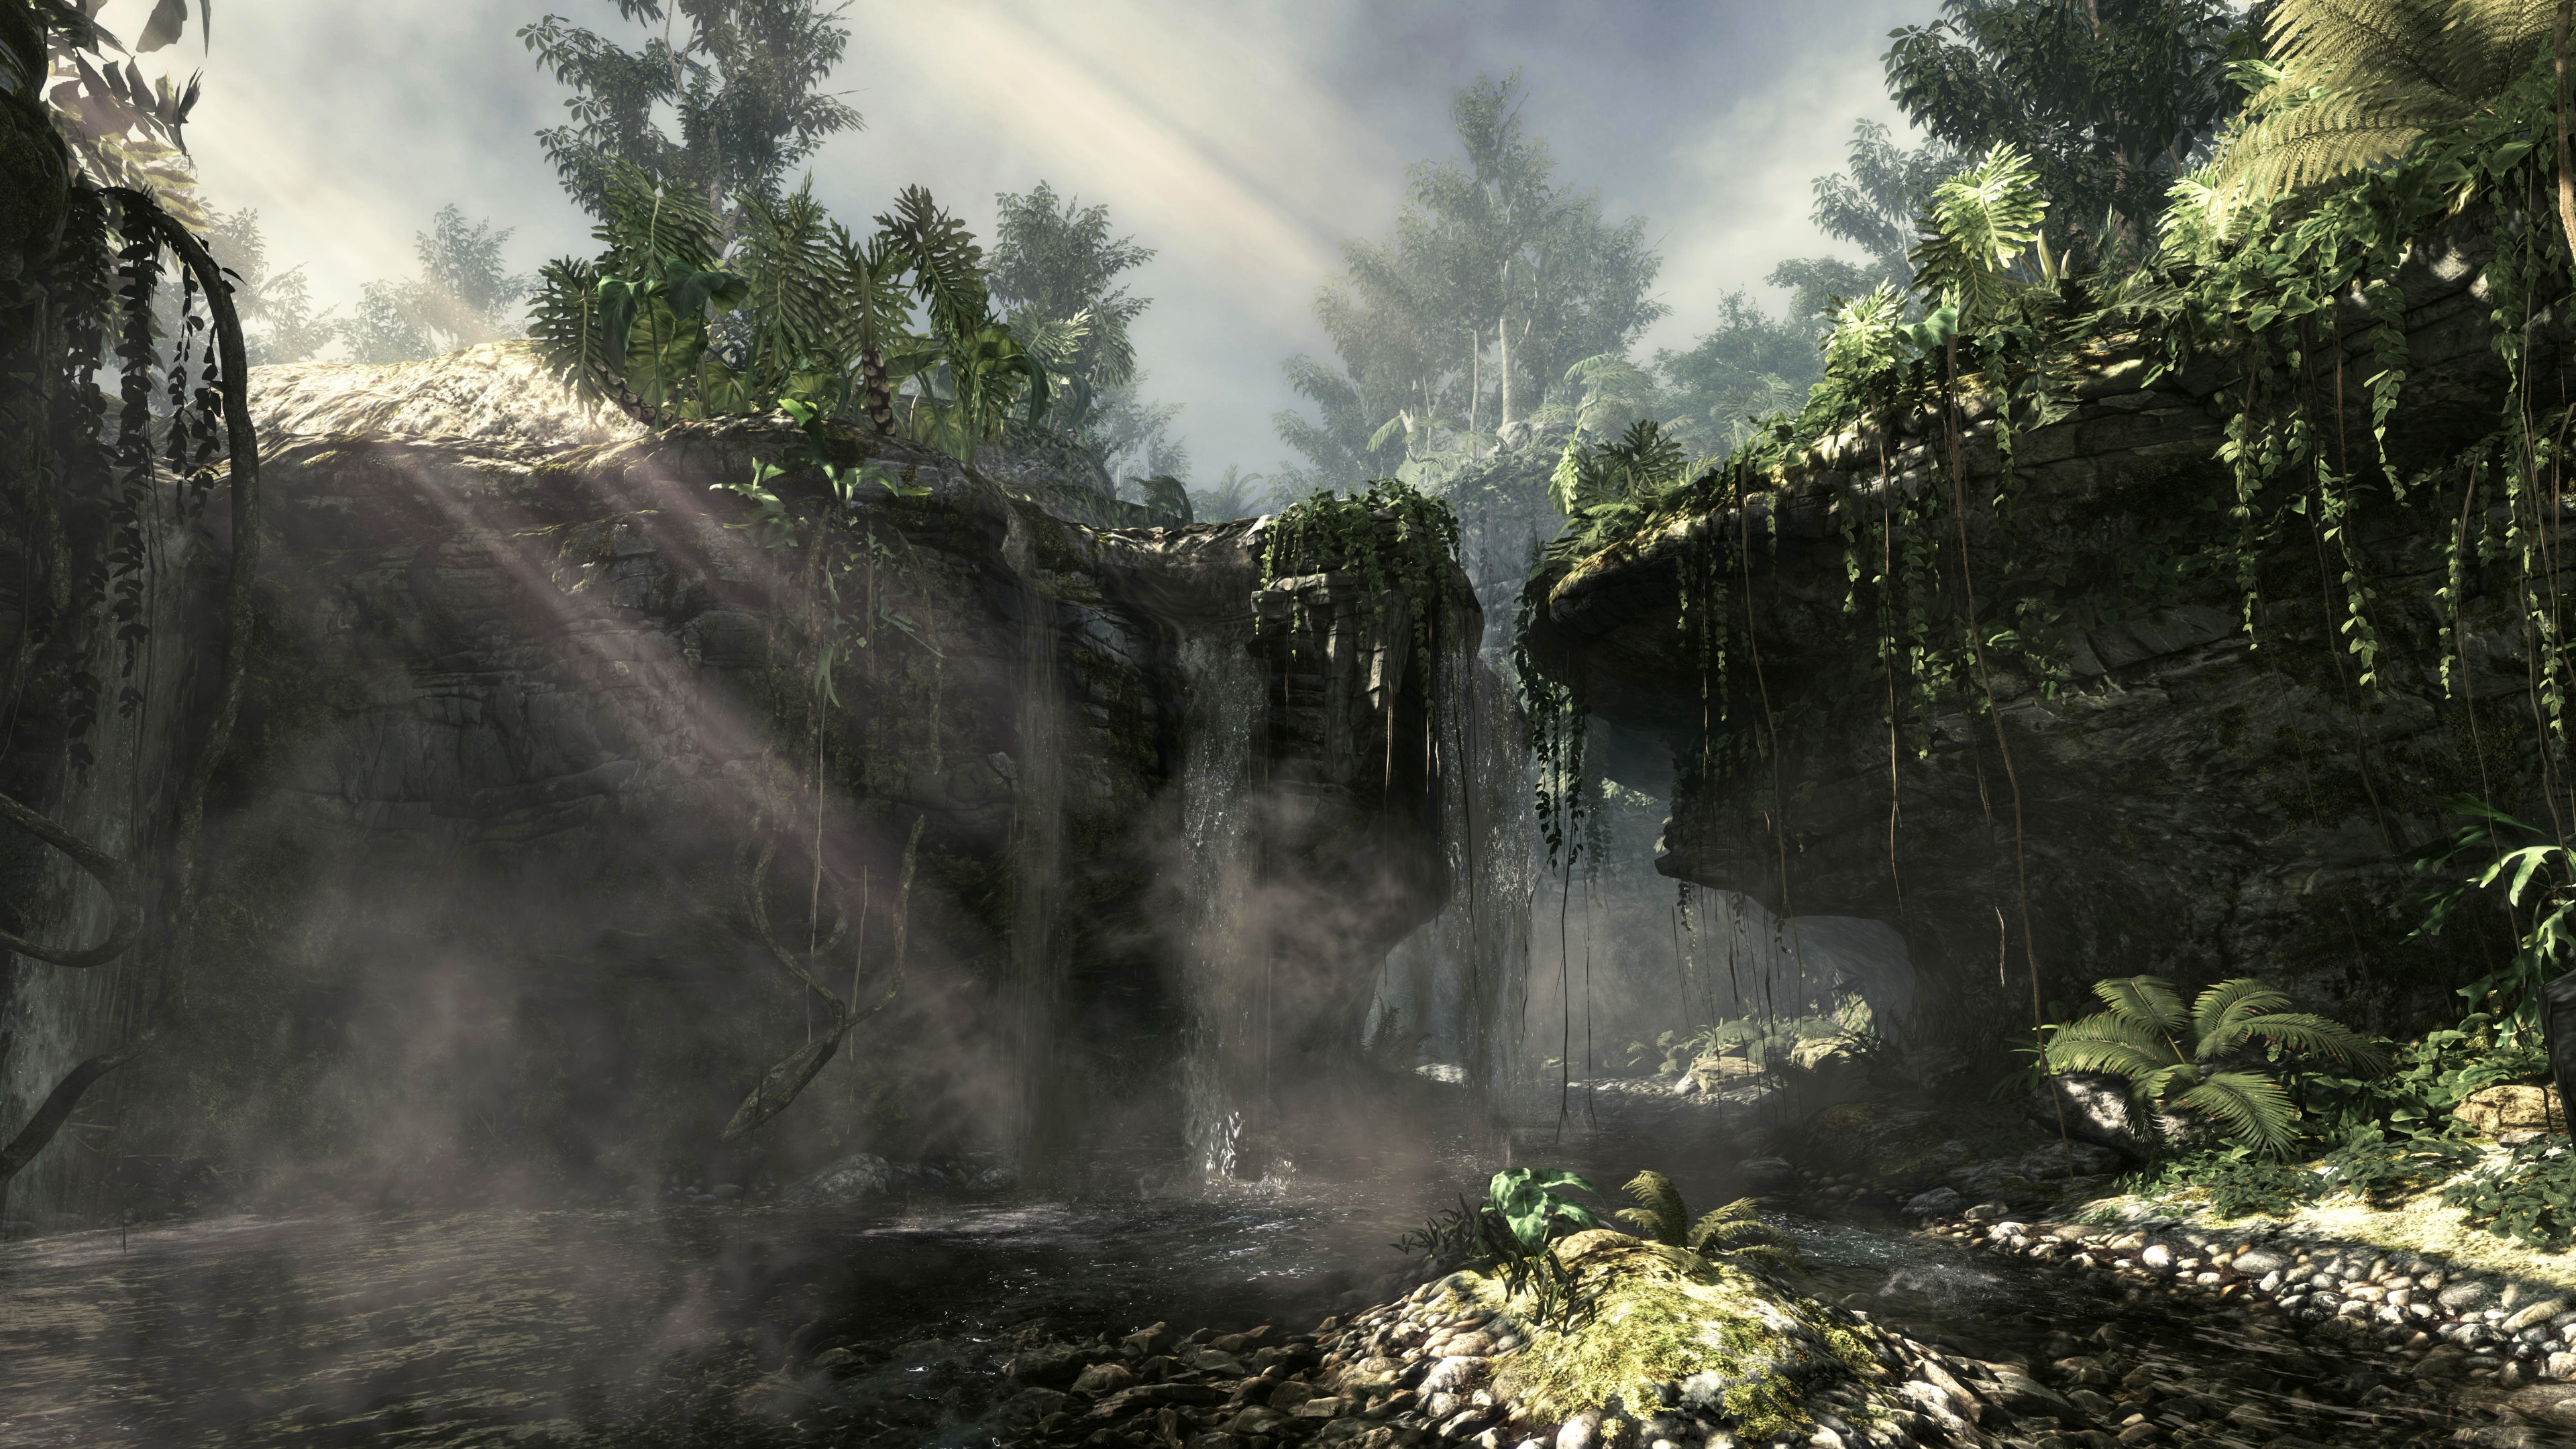 Call of Duty Ghosts, Call of Duty Black Ops Ii, Activision, Infinity Ward, Vegetation. Wallpaper in 3840x2160 Resolution